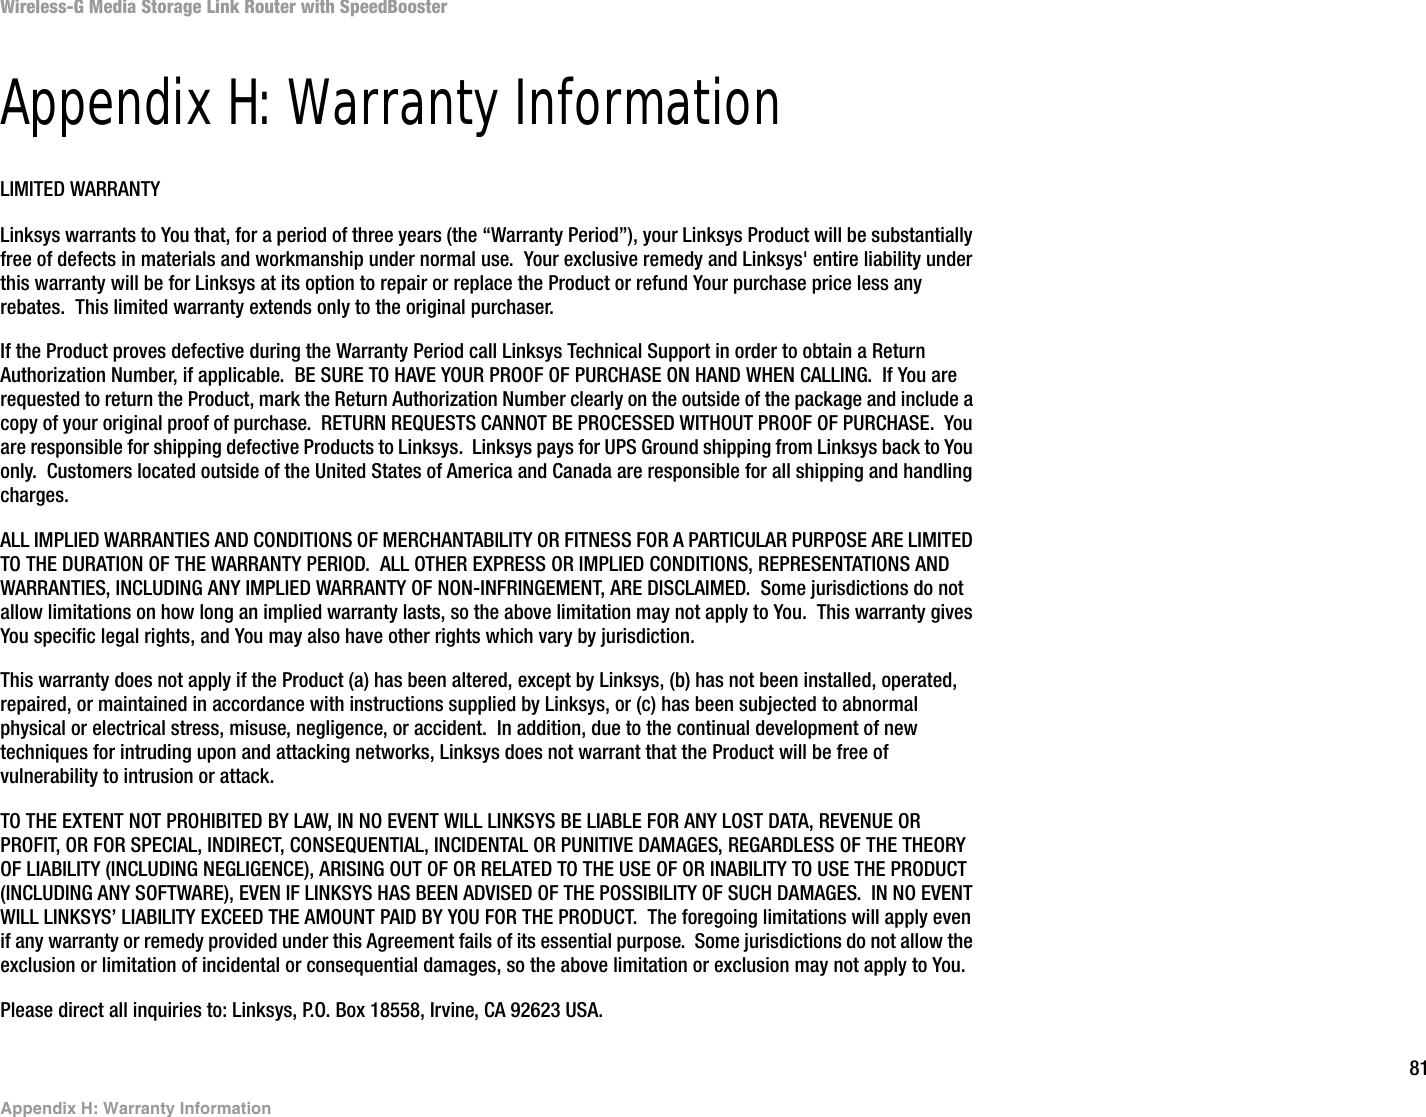 81Appendix H: Warranty InformationWireless-G Media Storage Link Router with SpeedBoosterAppendix H: Warranty InformationLIMITED WARRANTYLinksys warrants to You that, for a period of three years (the “Warranty Period”), your Linksys Product will be substantially free of defects in materials and workmanship under normal use.  Your exclusive remedy and Linksys&apos; entire liability under this warranty will be for Linksys at its option to repair or replace the Product or refund Your purchase price less any rebates.  This limited warranty extends only to the original purchaser.  If the Product proves defective during the Warranty Period call Linksys Technical Support in order to obtain a Return Authorization Number, if applicable.  BE SURE TO HAVE YOUR PROOF OF PURCHASE ON HAND WHEN CALLING.  If You are requested to return the Product, mark the Return Authorization Number clearly on the outside of the package and include a copy of your original proof of purchase.  RETURN REQUESTS CANNOT BE PROCESSED WITHOUT PROOF OF PURCHASE.  You are responsible for shipping defective Products to Linksys.  Linksys pays for UPS Ground shipping from Linksys back to You only.  Customers located outside of the United States of America and Canada are responsible for all shipping and handling charges. ALL IMPLIED WARRANTIES AND CONDITIONS OF MERCHANTABILITY OR FITNESS FOR A PARTICULAR PURPOSE ARE LIMITED TO THE DURATION OF THE WARRANTY PERIOD.  ALL OTHER EXPRESS OR IMPLIED CONDITIONS, REPRESENTATIONS AND WARRANTIES, INCLUDING ANY IMPLIED WARRANTY OF NON-INFRINGEMENT, ARE DISCLAIMED.  Some jurisdictions do not allow limitations on how long an implied warranty lasts, so the above limitation may not apply to You.  This warranty gives You specific legal rights, and You may also have other rights which vary by jurisdiction.This warranty does not apply if the Product (a) has been altered, except by Linksys, (b) has not been installed, operated, repaired, or maintained in accordance with instructions supplied by Linksys, or (c) has been subjected to abnormal physical or electrical stress, misuse, negligence, or accident.  In addition, due to the continual development of new techniques for intruding upon and attacking networks, Linksys does not warrant that the Product will be free of vulnerability to intrusion or attack.TO THE EXTENT NOT PROHIBITED BY LAW, IN NO EVENT WILL LINKSYS BE LIABLE FOR ANY LOST DATA, REVENUE OR PROFIT, OR FOR SPECIAL, INDIRECT, CONSEQUENTIAL, INCIDENTAL OR PUNITIVE DAMAGES, REGARDLESS OF THE THEORY OF LIABILITY (INCLUDING NEGLIGENCE), ARISING OUT OF OR RELATED TO THE USE OF OR INABILITY TO USE THE PRODUCT (INCLUDING ANY SOFTWARE), EVEN IF LINKSYS HAS BEEN ADVISED OF THE POSSIBILITY OF SUCH DAMAGES.  IN NO EVENT WILL LINKSYS’ LIABILITY EXCEED THE AMOUNT PAID BY YOU FOR THE PRODUCT.  The foregoing limitations will apply even if any warranty or remedy provided under this Agreement fails of its essential purpose.  Some jurisdictions do not allow the exclusion or limitation of incidental or consequential damages, so the above limitation or exclusion may not apply to You.Please direct all inquiries to: Linksys, P.O. Box 18558, Irvine, CA 92623 USA.